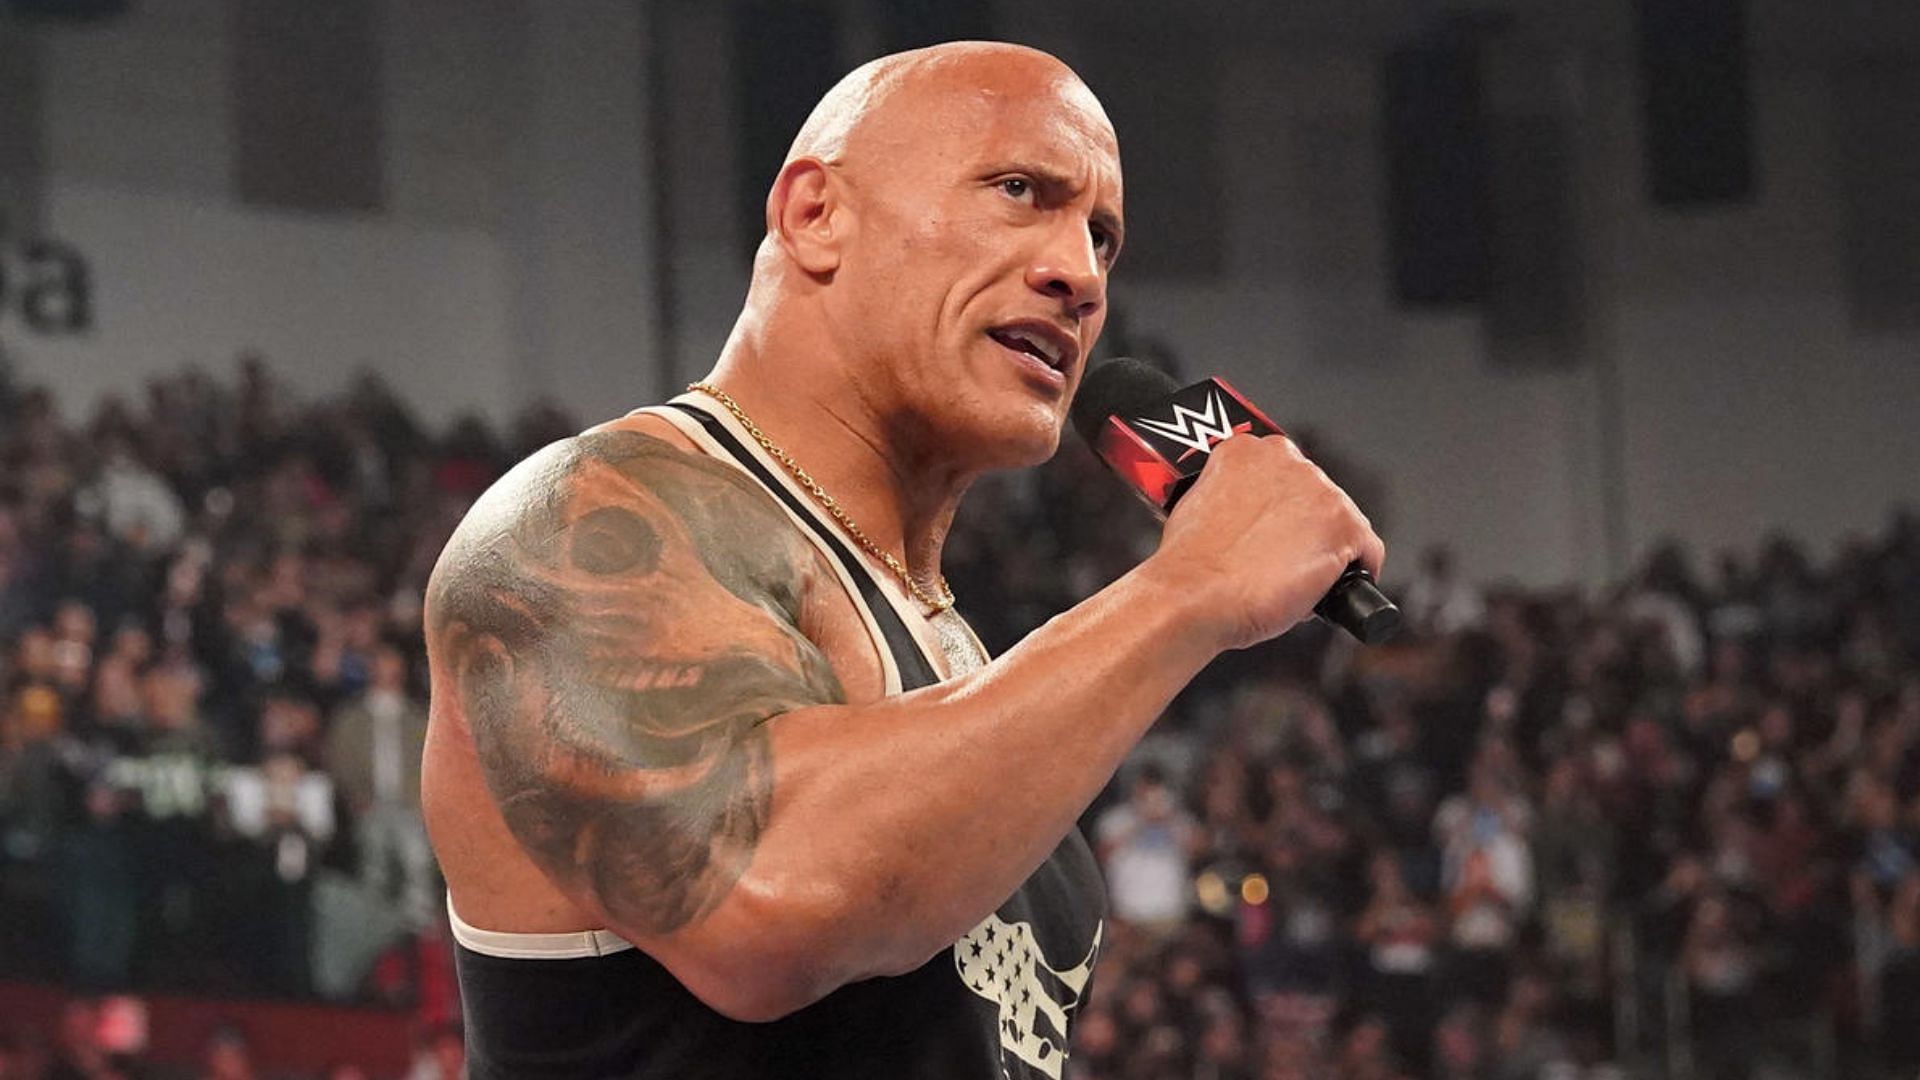 The Rock at WWE RAW Day 1 edition!